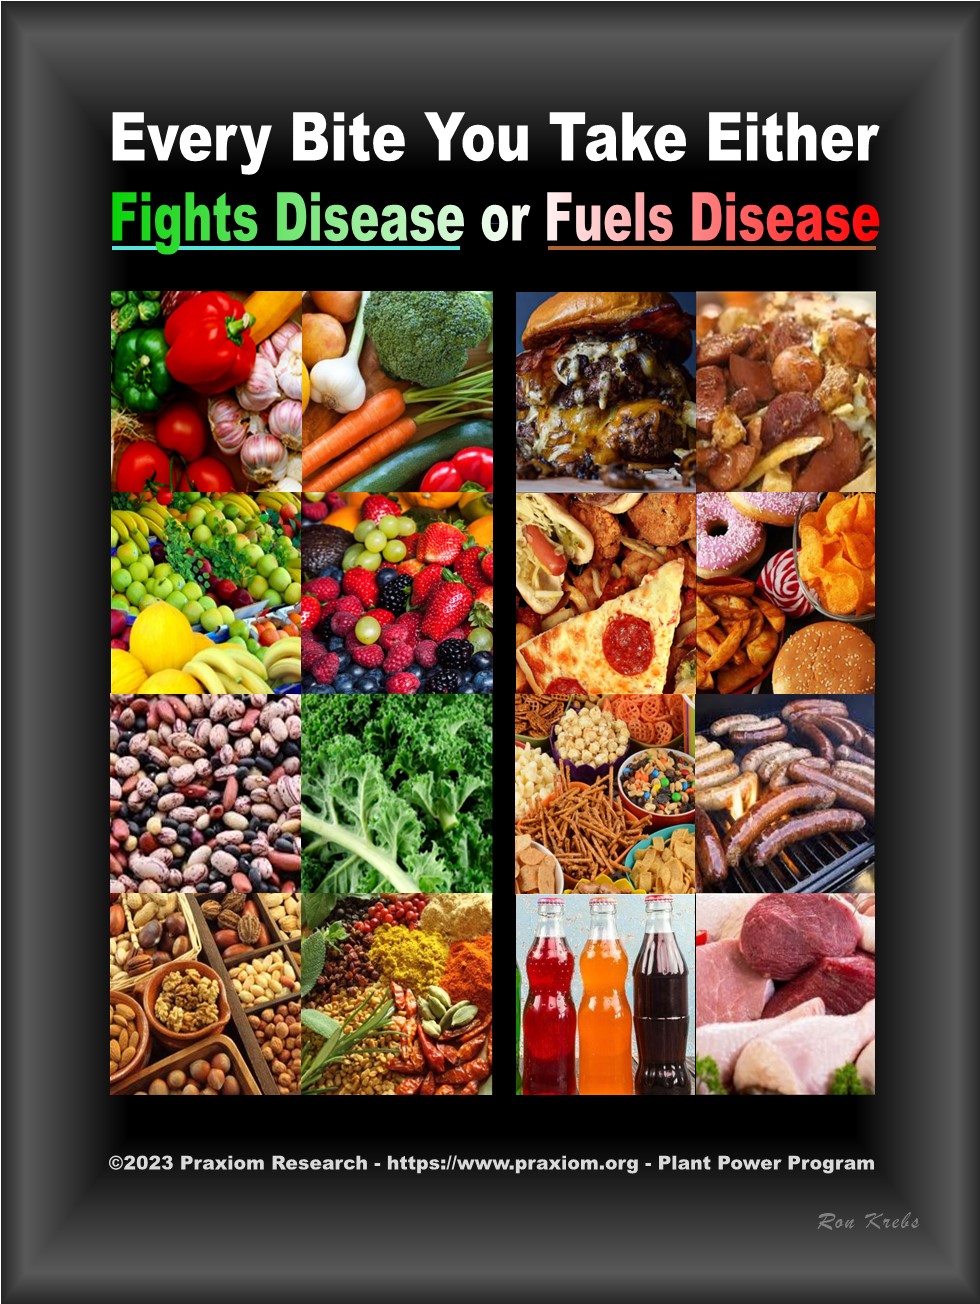 Every Bite You Take Either Fuels Disease or Fights Disease - Ron                Krebs